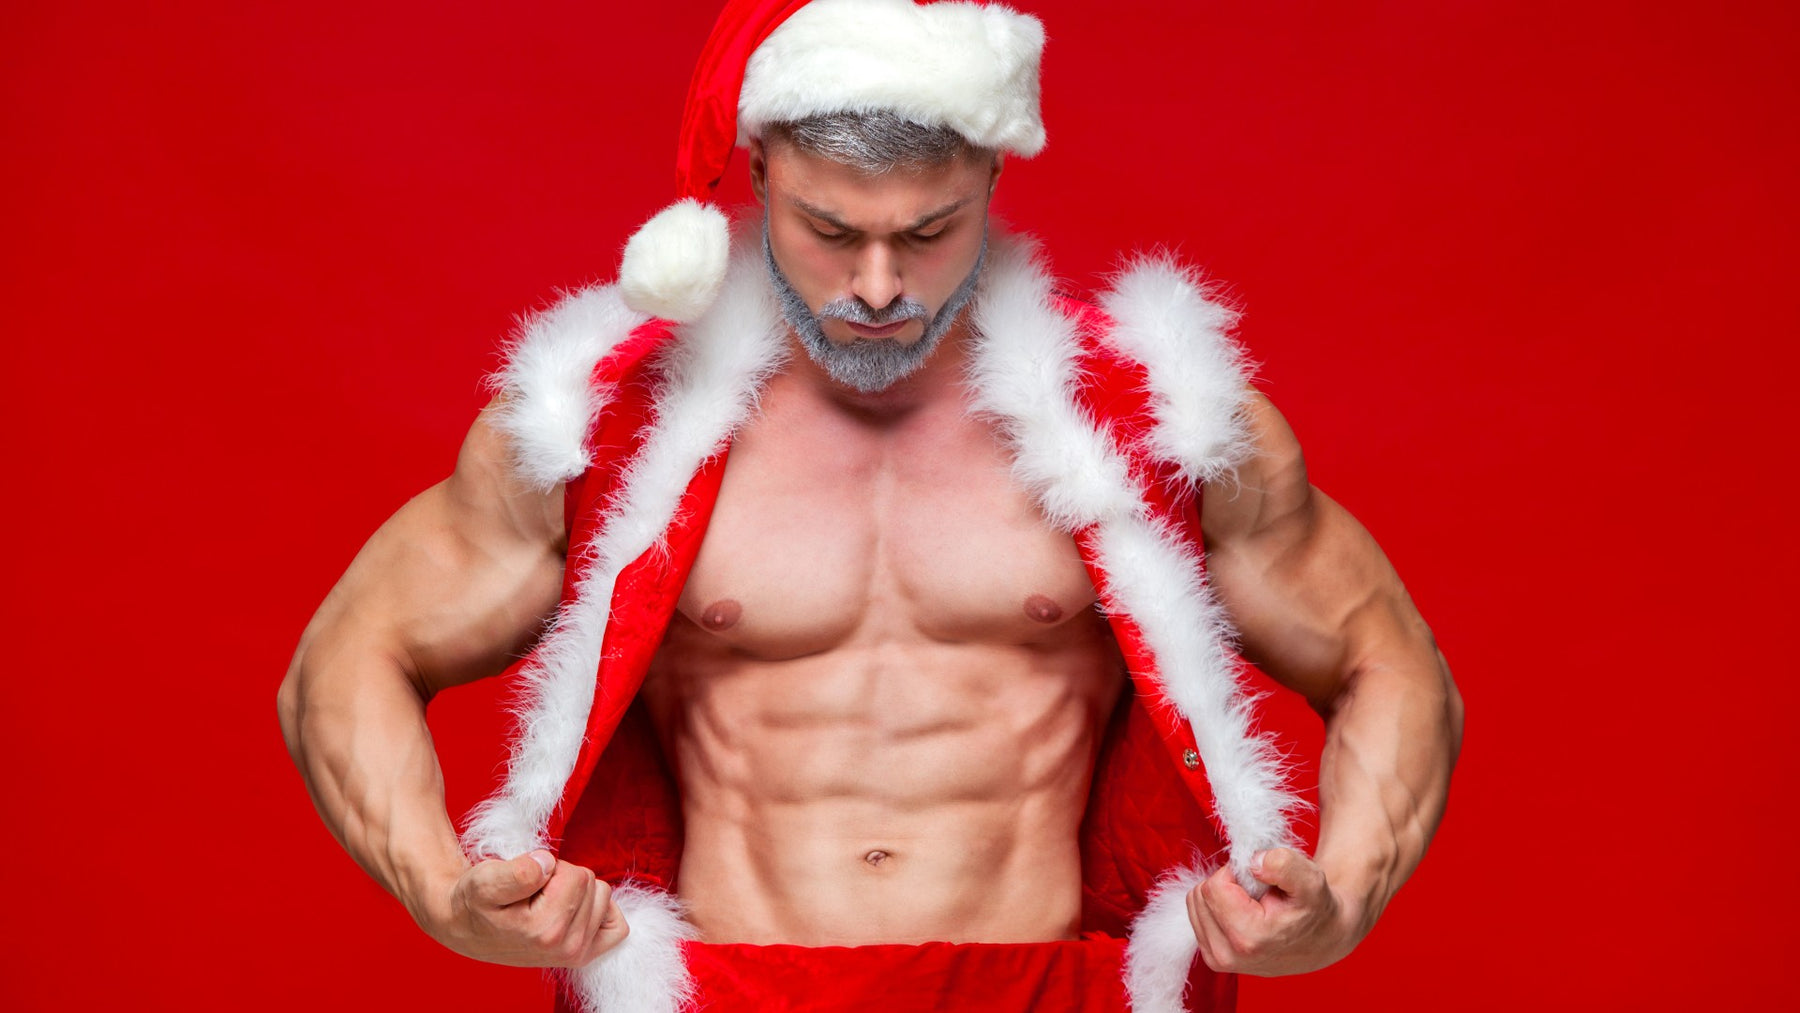 Top 8 Holiday Gifts for Men That Work Out